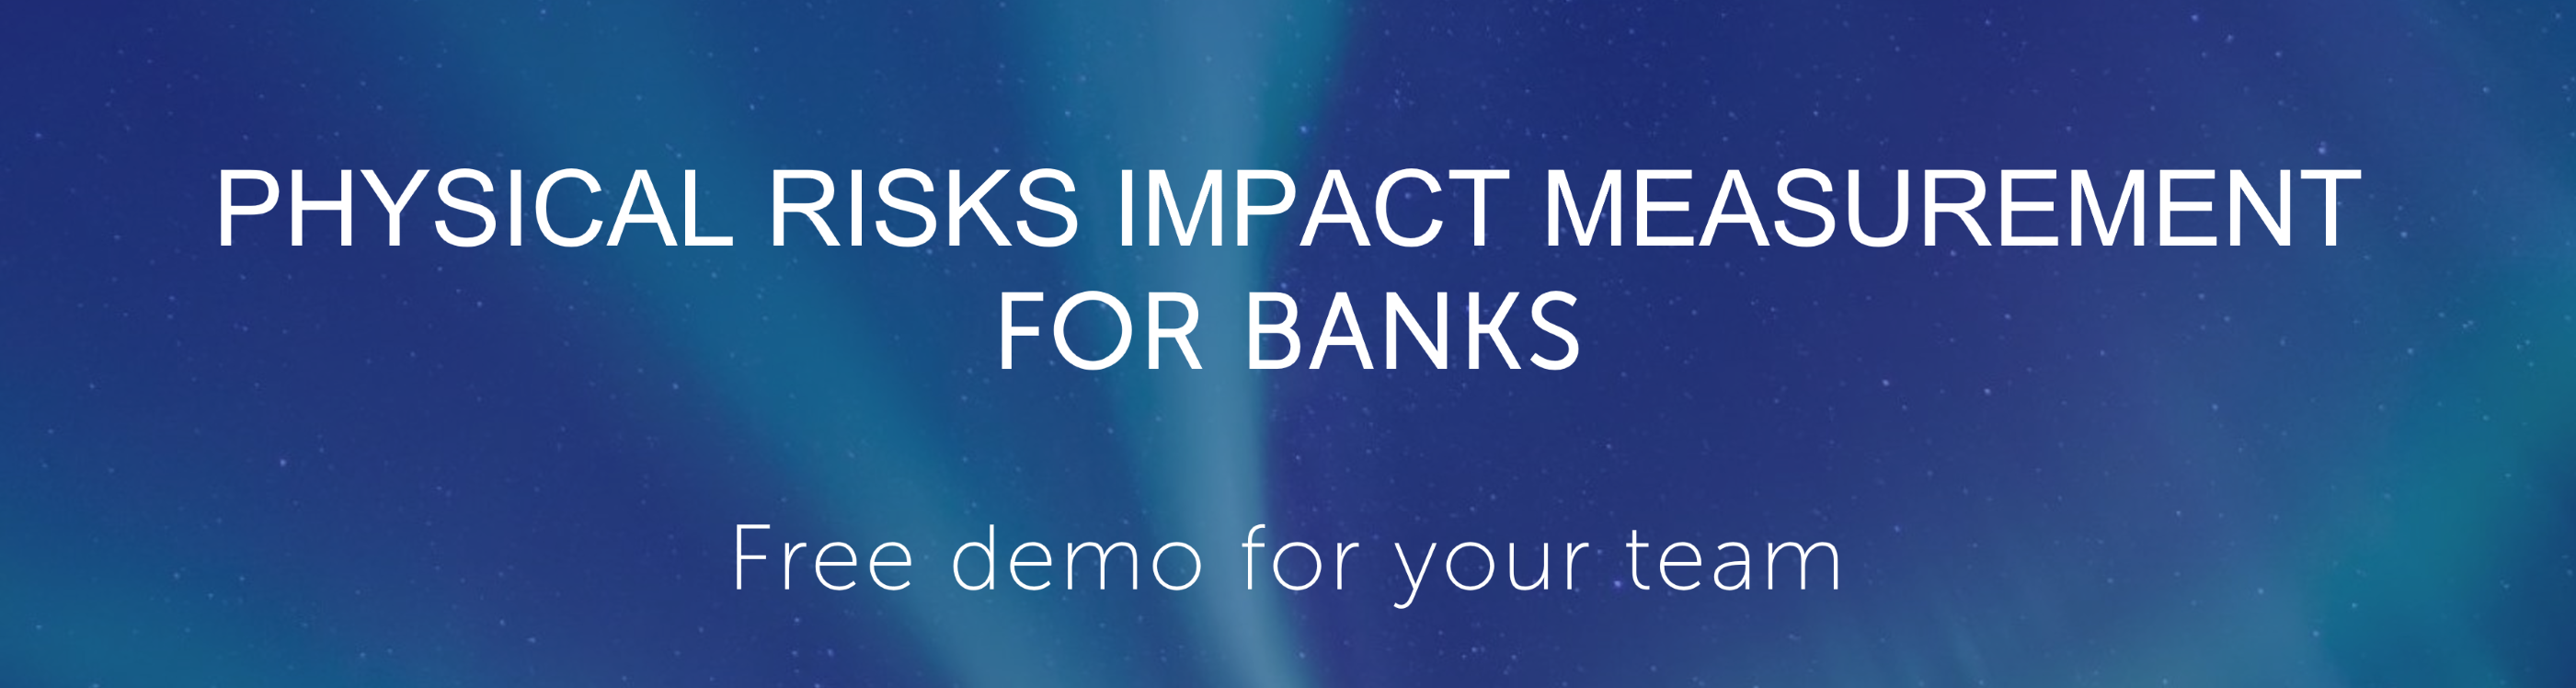 PHYSICAL RISKS IMPACT MEASUREMENT FOR BANKS - FREE DEMO